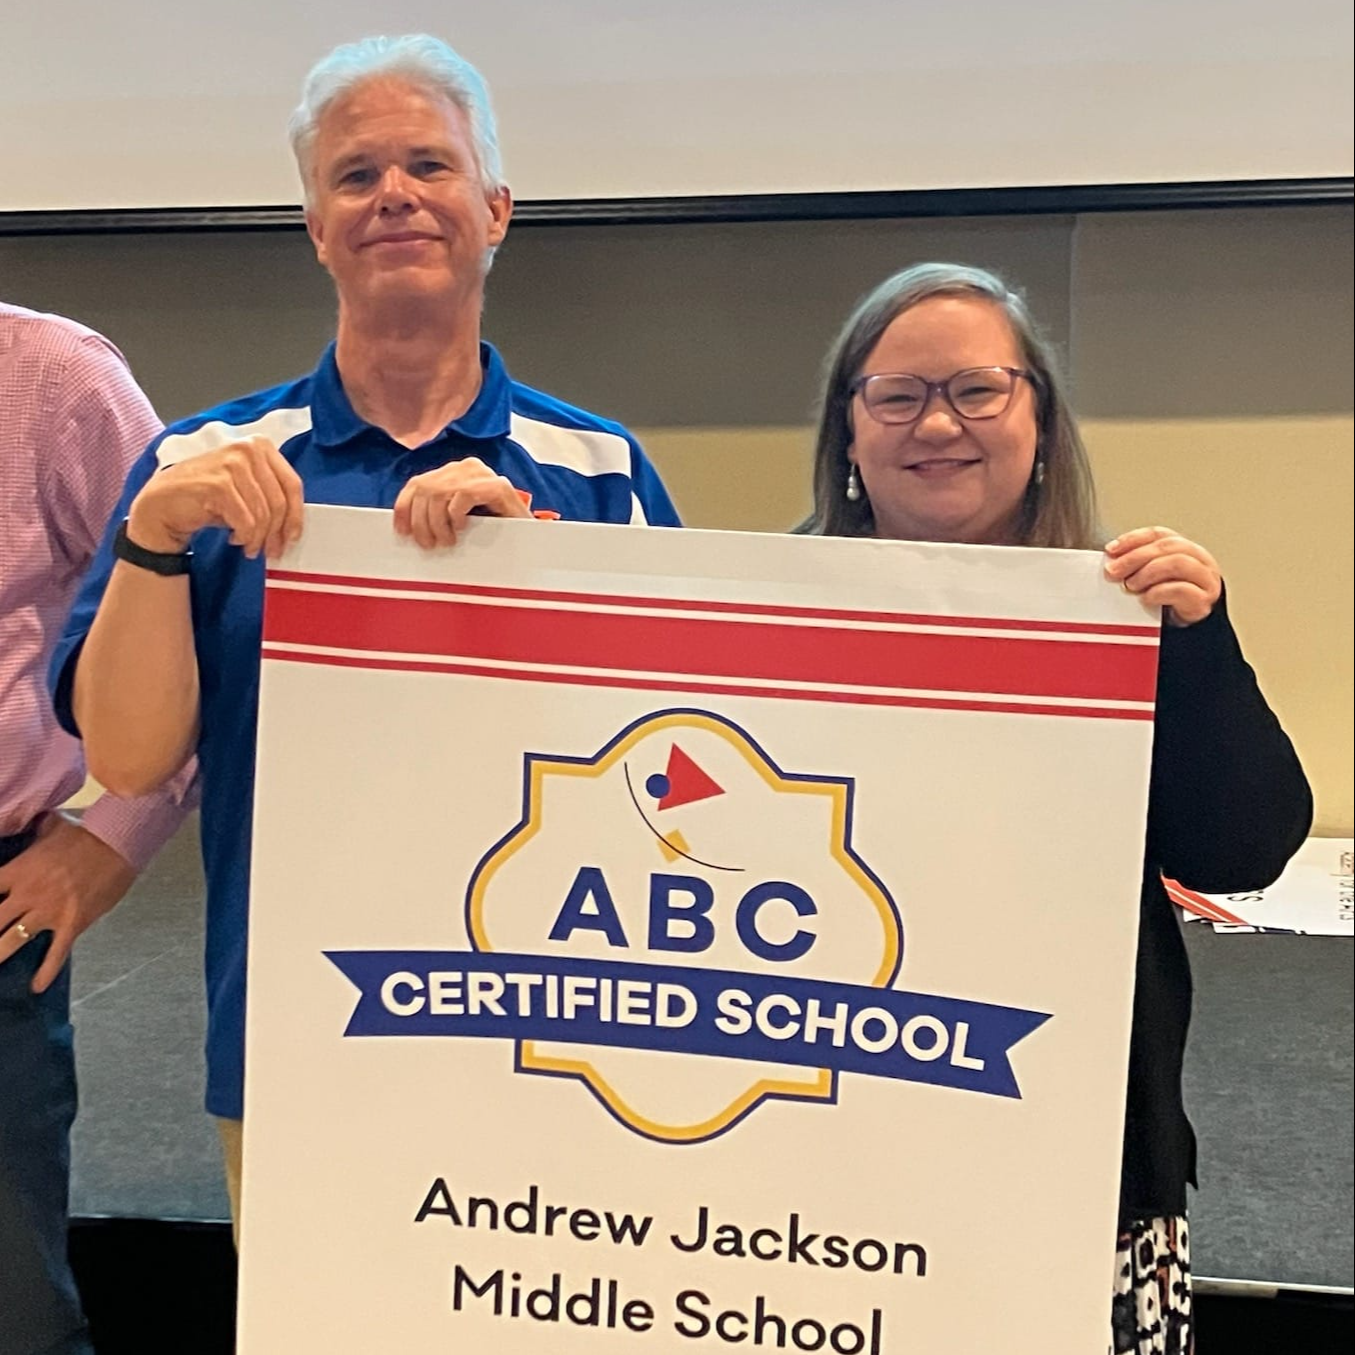 AJMS has been an ABC school for 20+ years